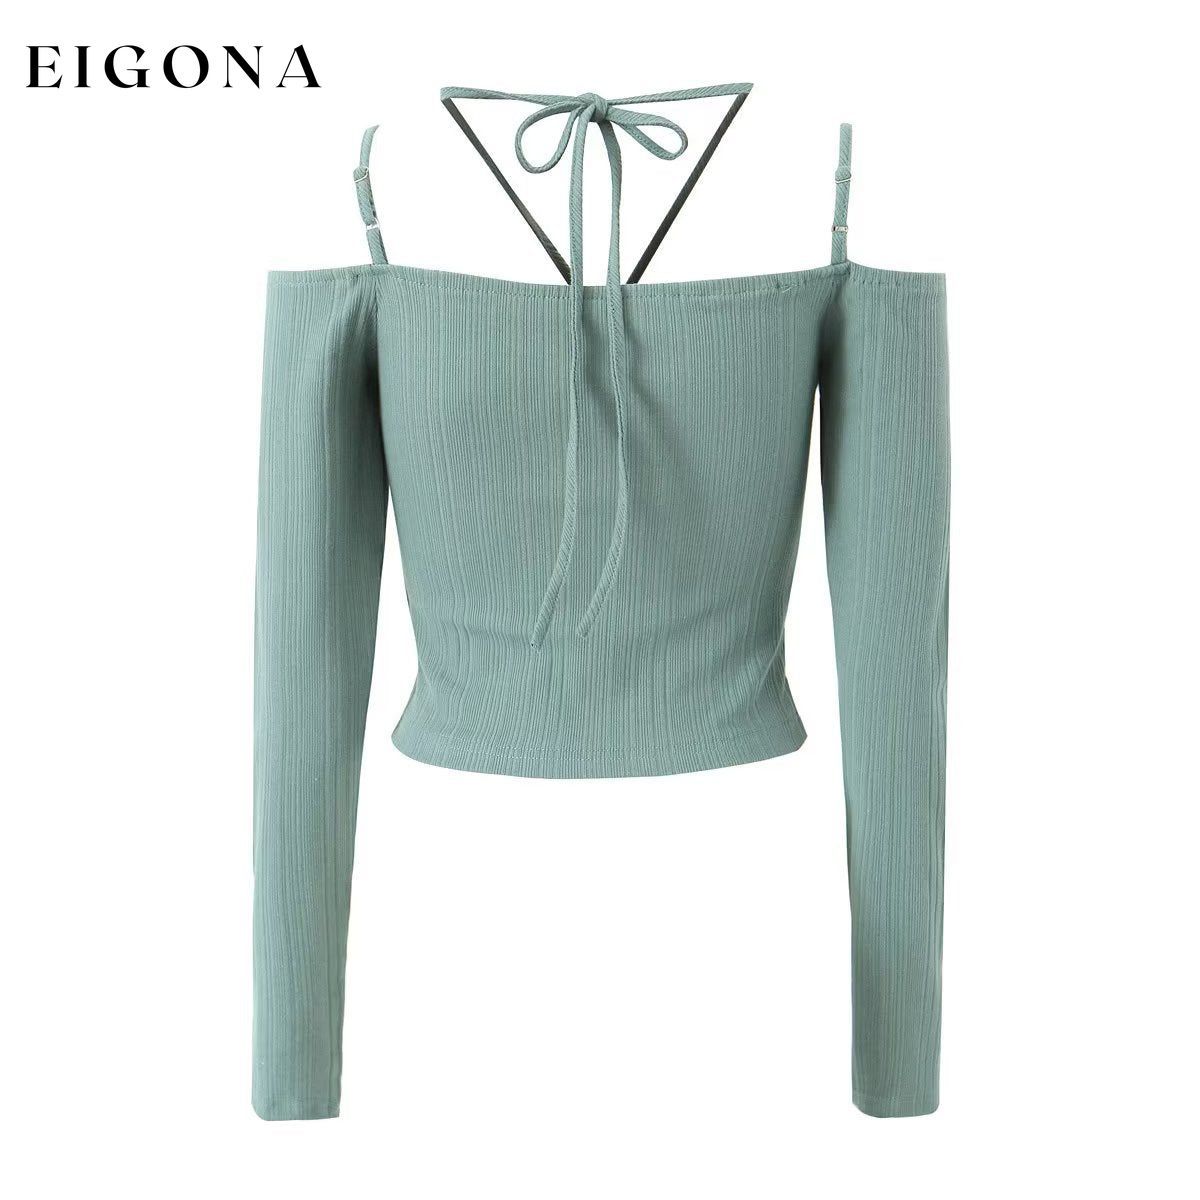 Autumn Two Color off Neck Long Sleeve Knitted T shirt Slim Fit Crop Top blouses clothes long sleeve tops off the shoulder shirt shirt shirts top tops